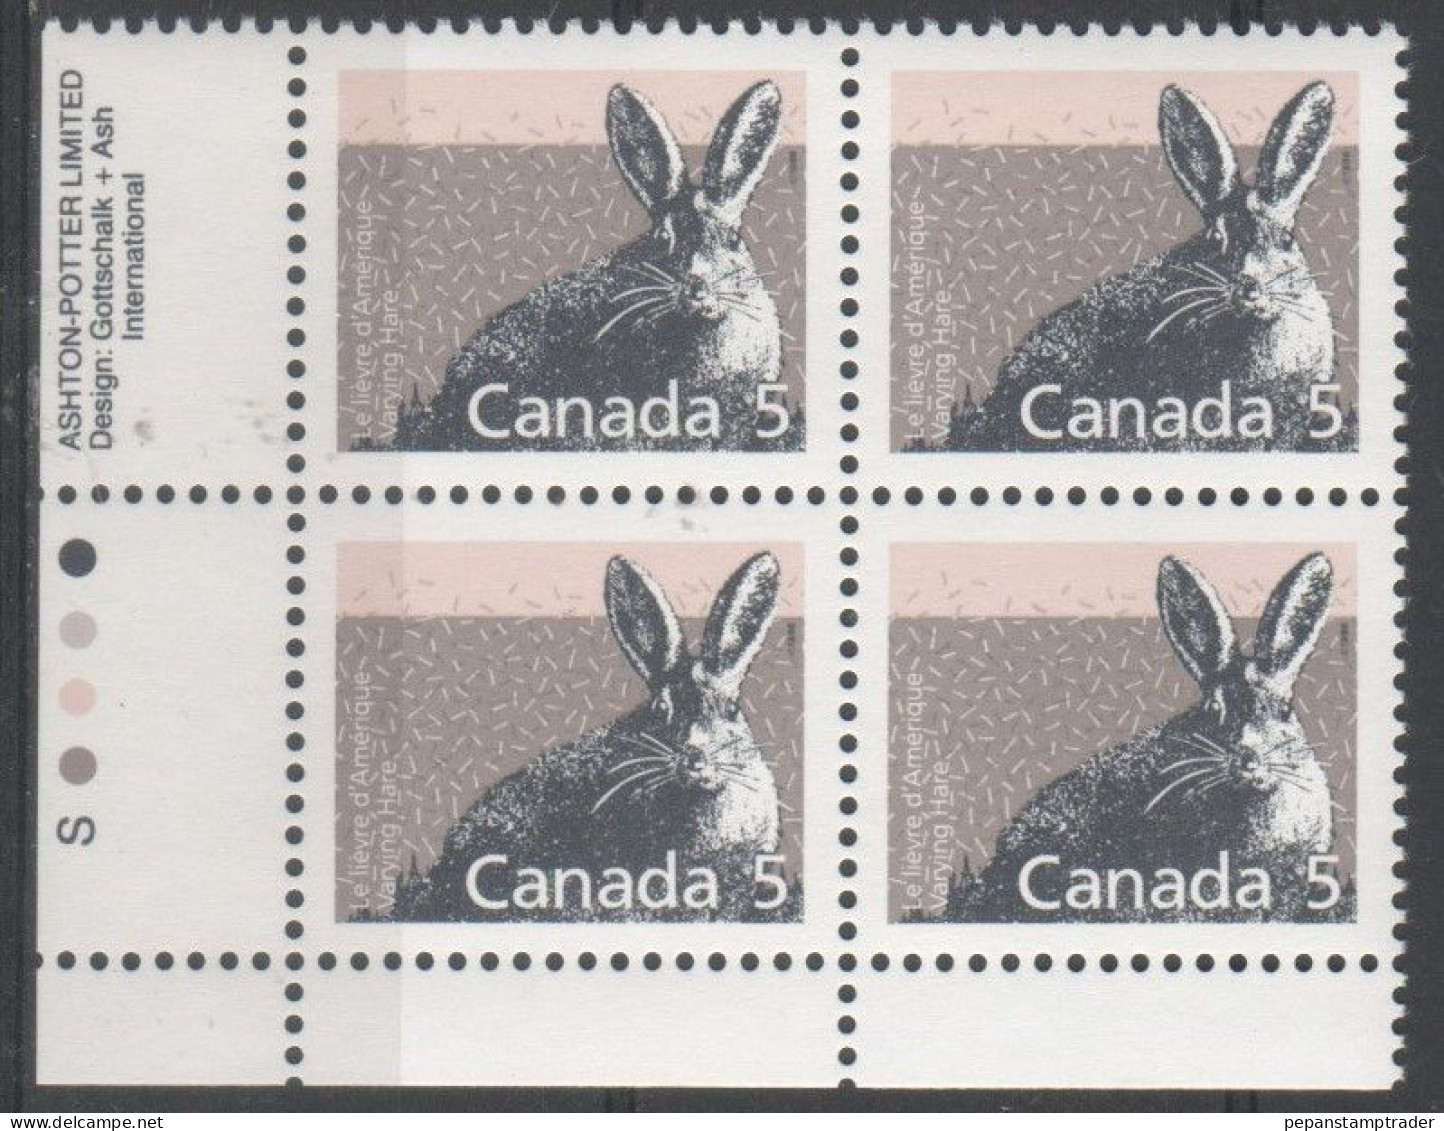 Canada - #1158 - MNH PB  Of 4 - Plate Number & Inscriptions